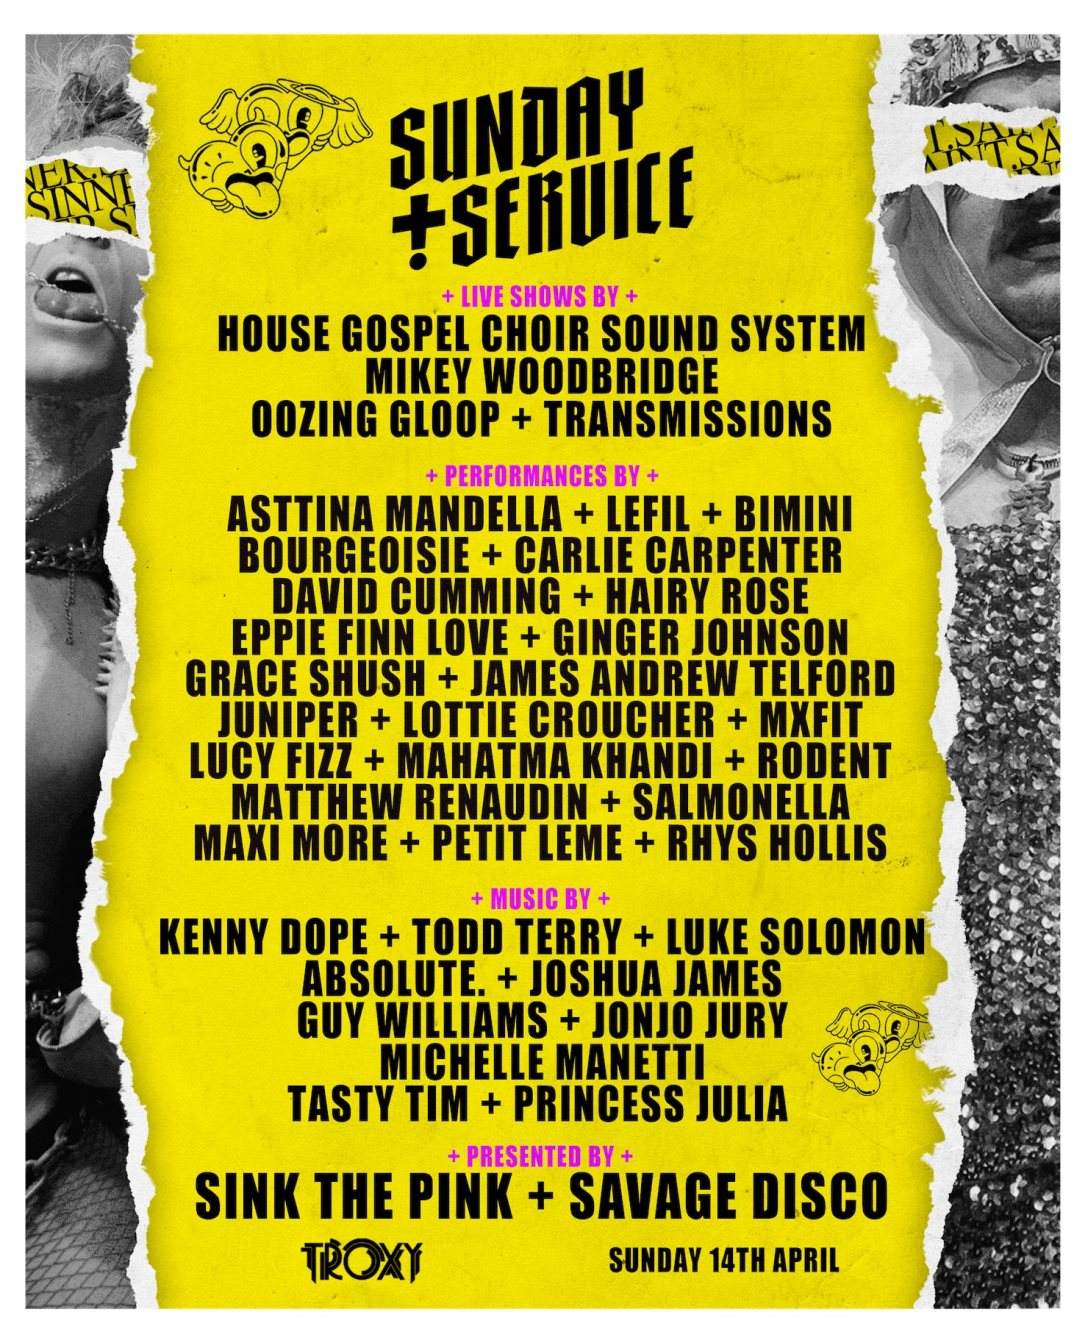 Sunday Service feat. Kenny Dope, Sink The Pink, Todd Terry and More - フライヤー表